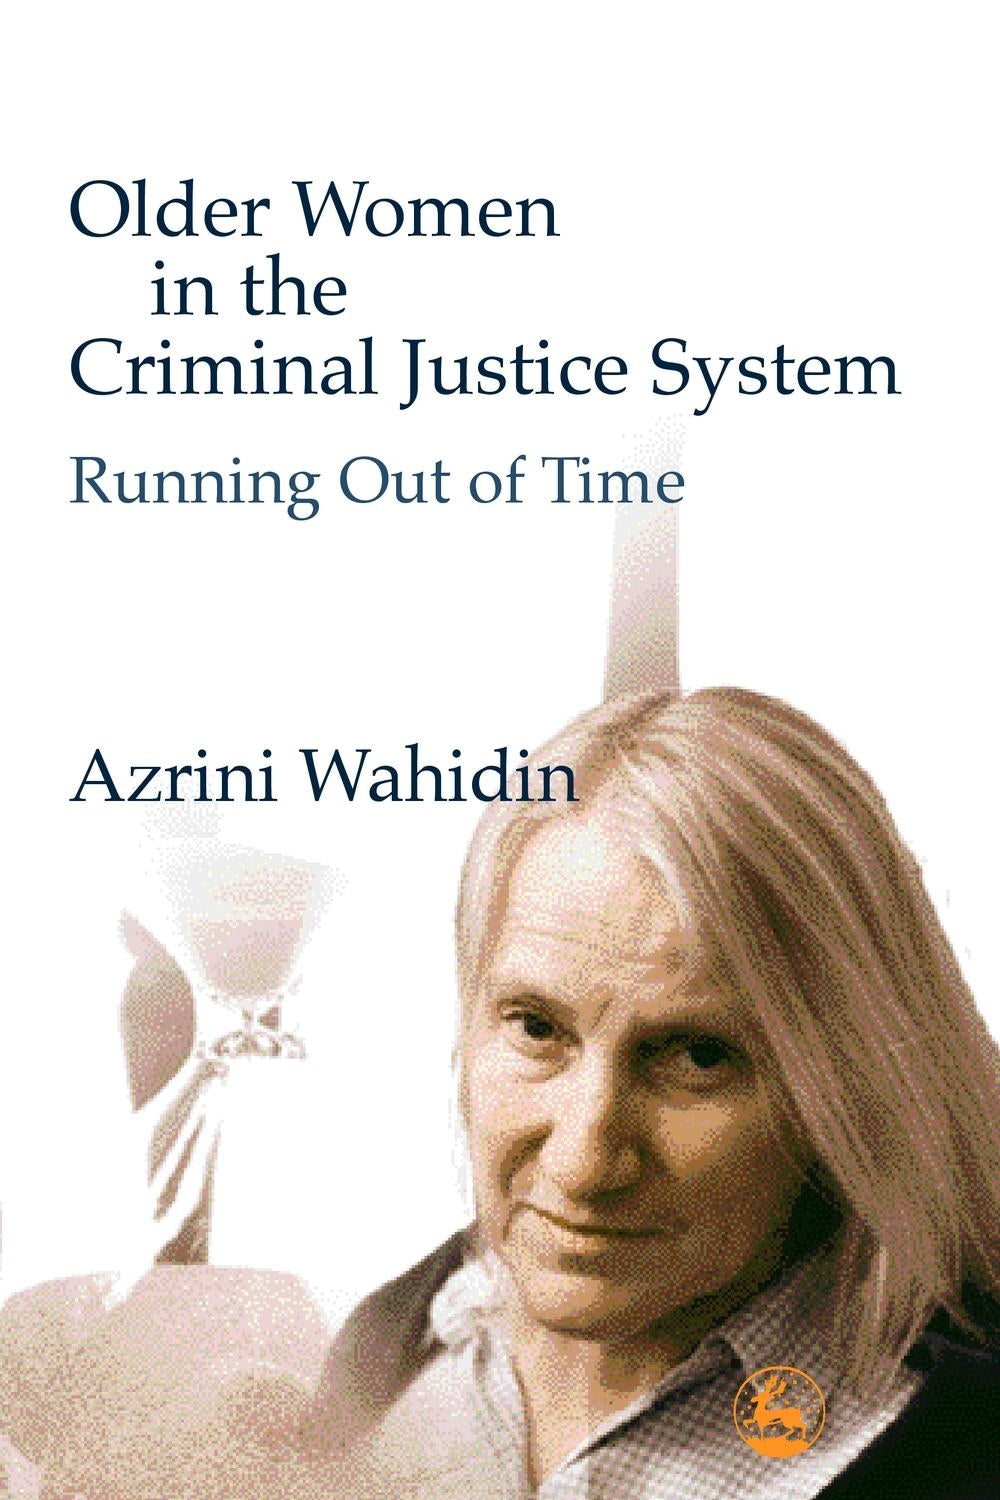 Older Women in the Criminal Justice System by Azrini Wahidin